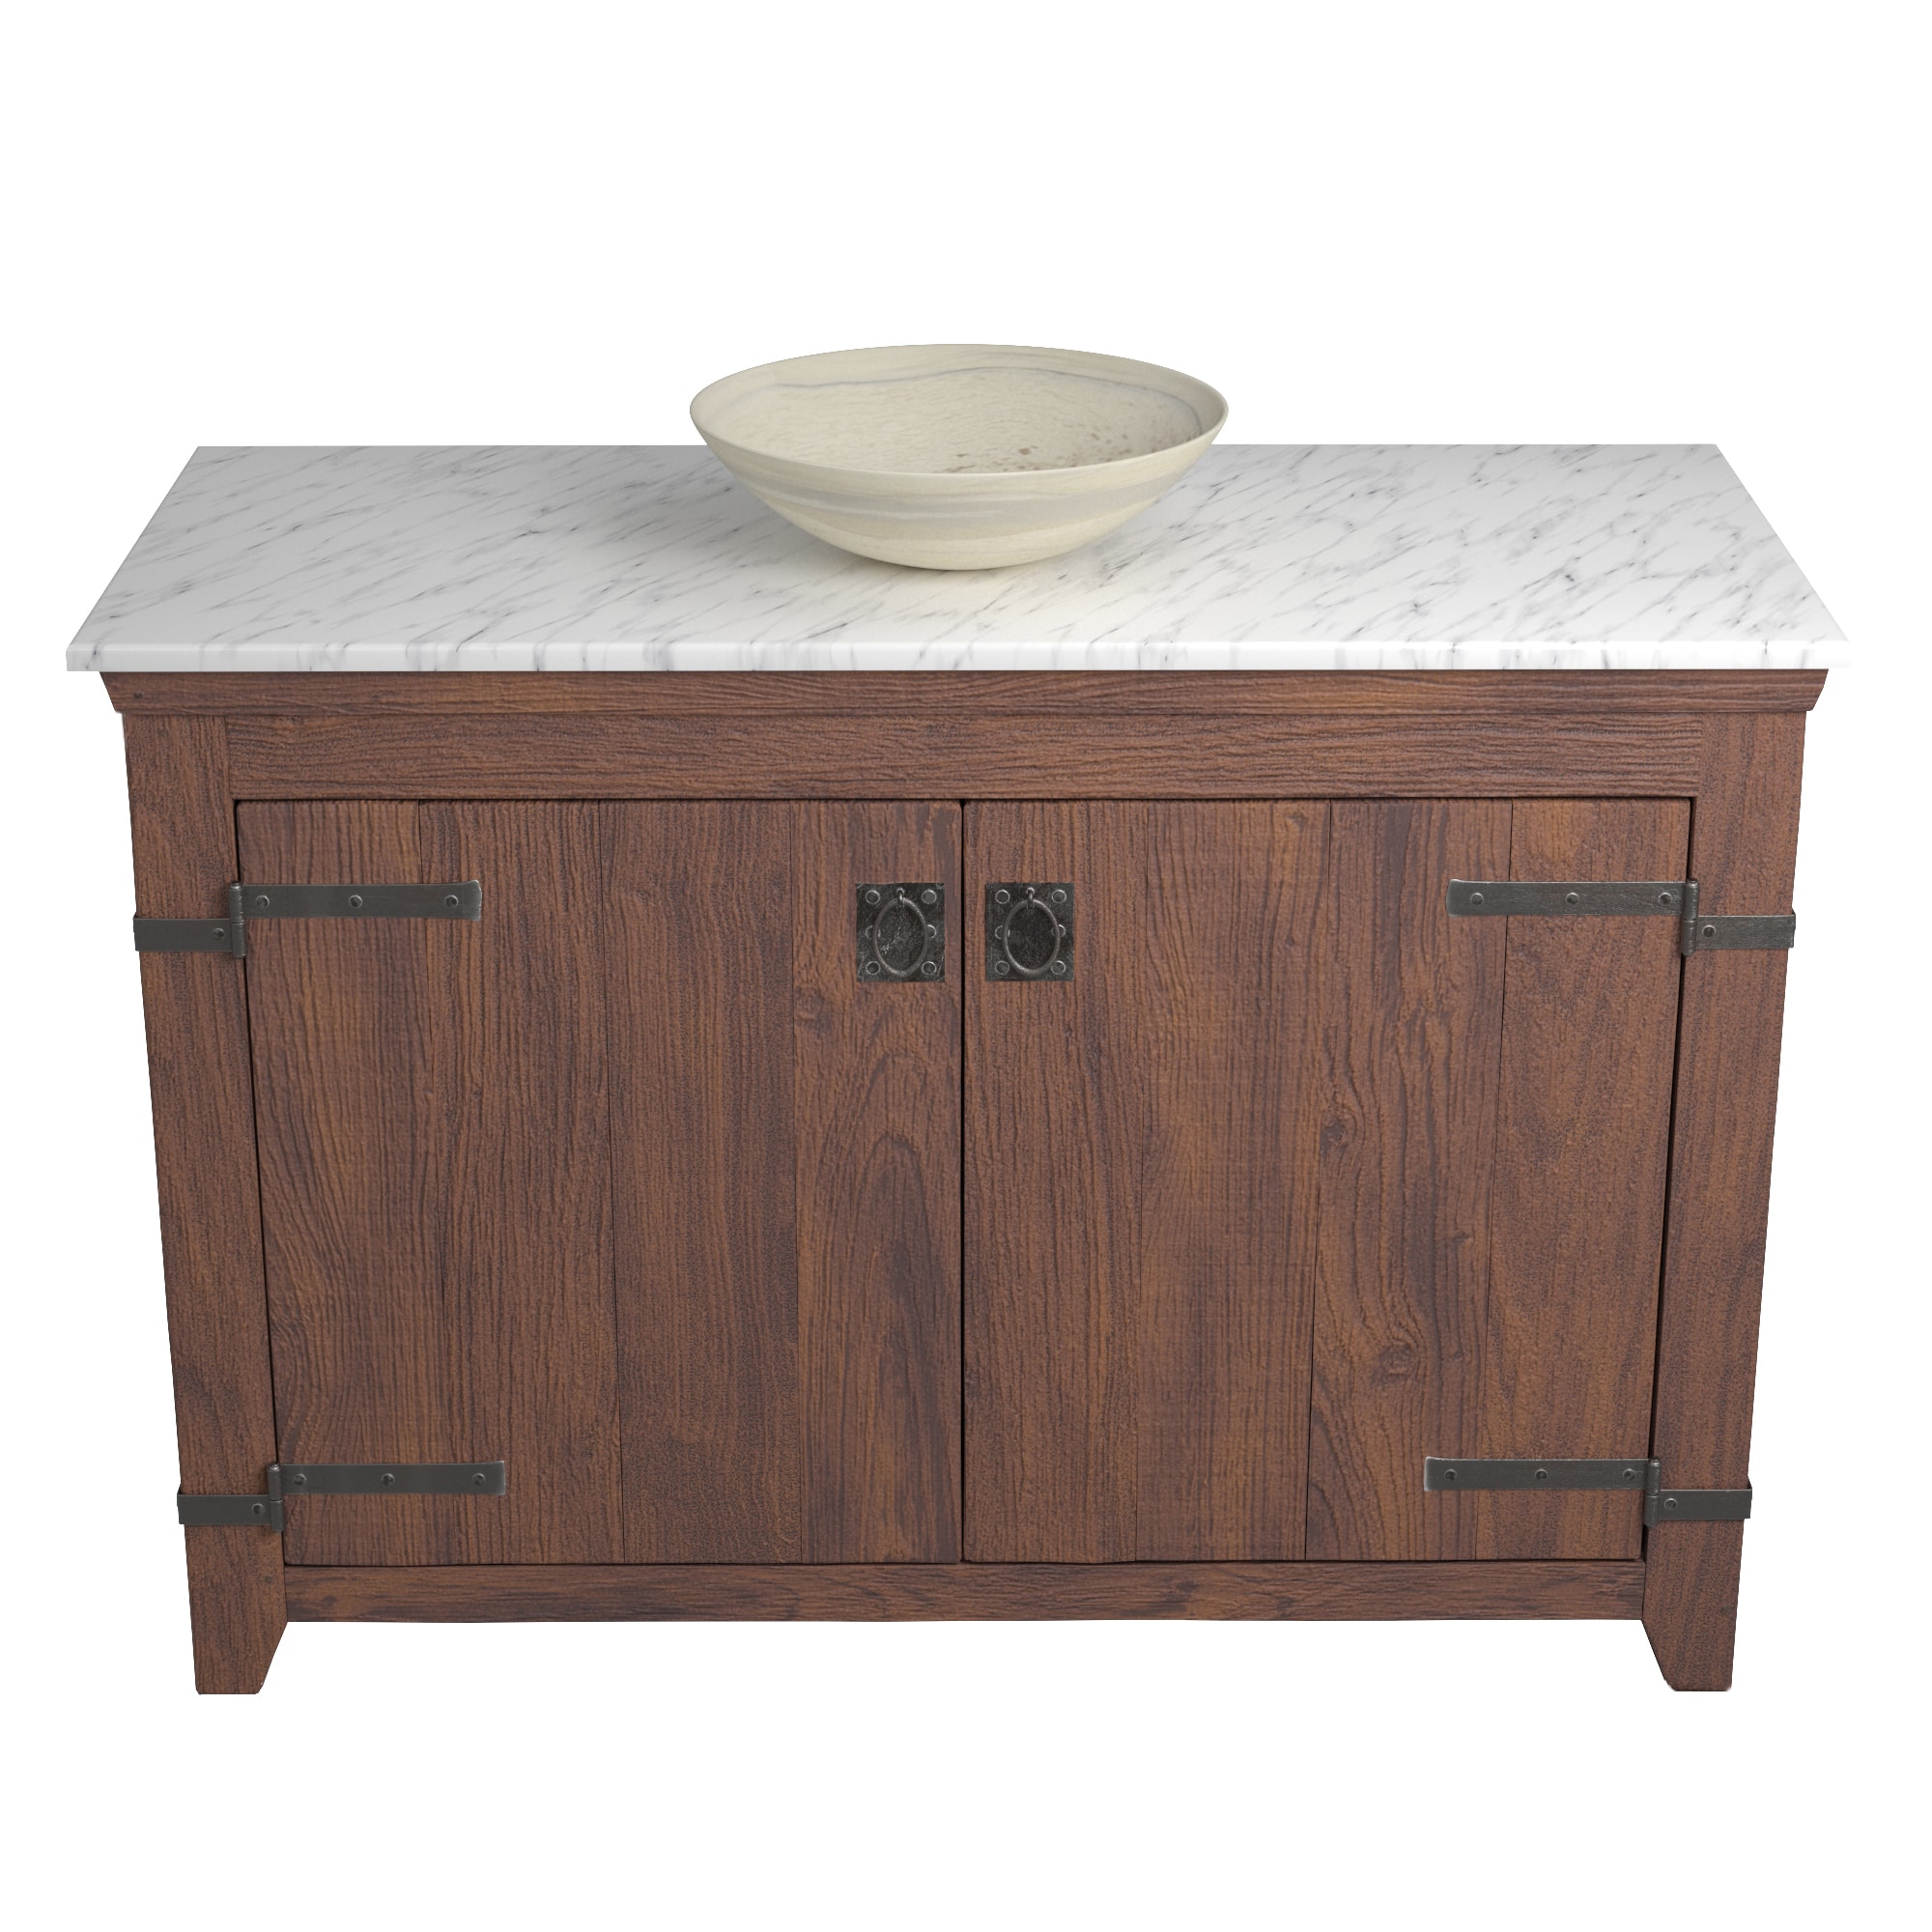 Native Trails 48" Americana Vanity in Chestnut with Carrara Marble Top and Verona in Beachcomber, Single Faucet Hole, BND48-VB-CT-MG-083